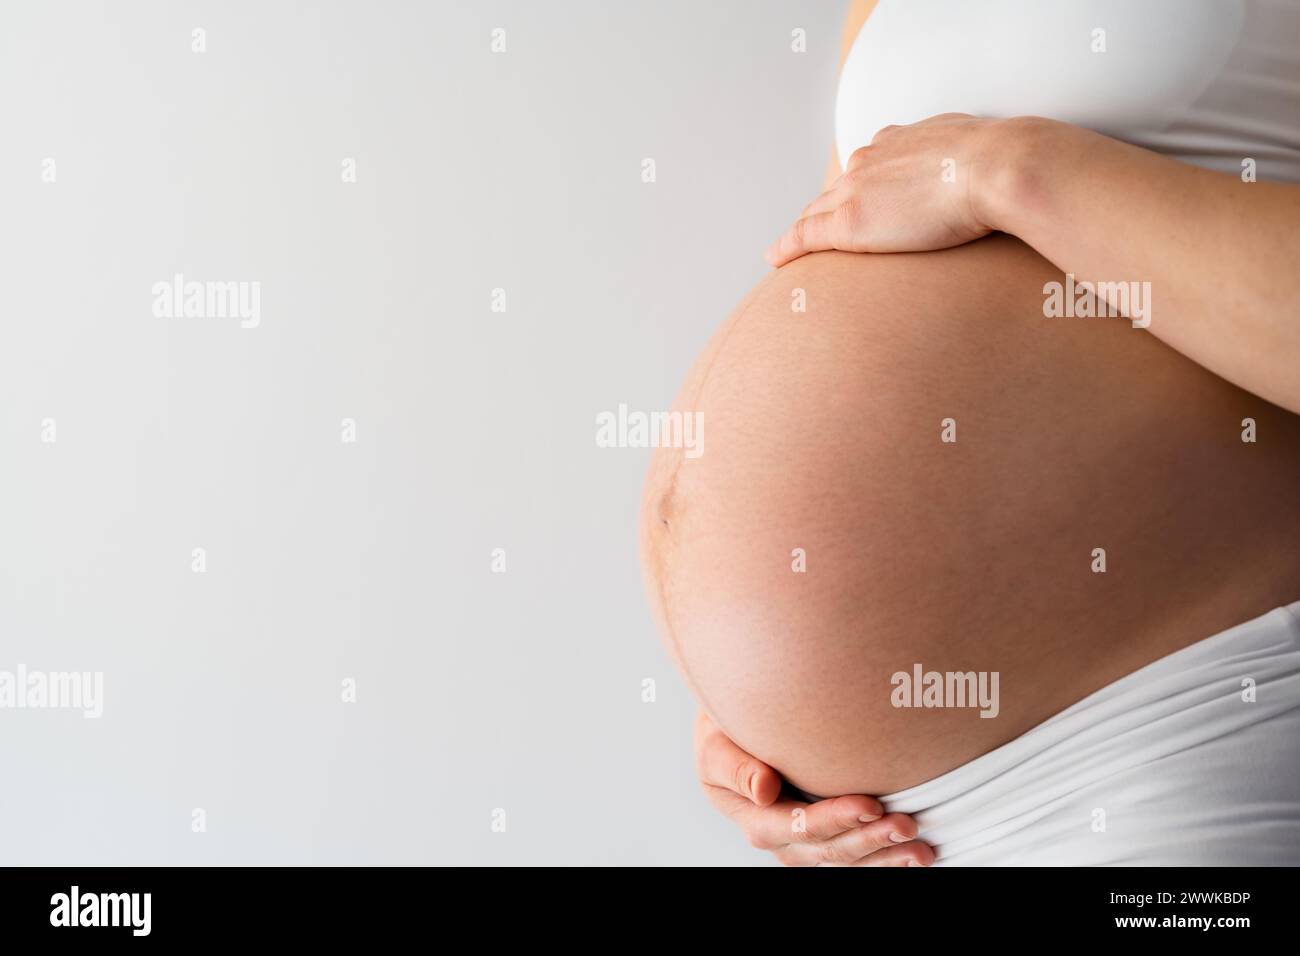 Description: Midsection of unrecognizable standing mother gently holding her very round pregnant baby belly. Side angle  view. White background. Brigh Stock Photo